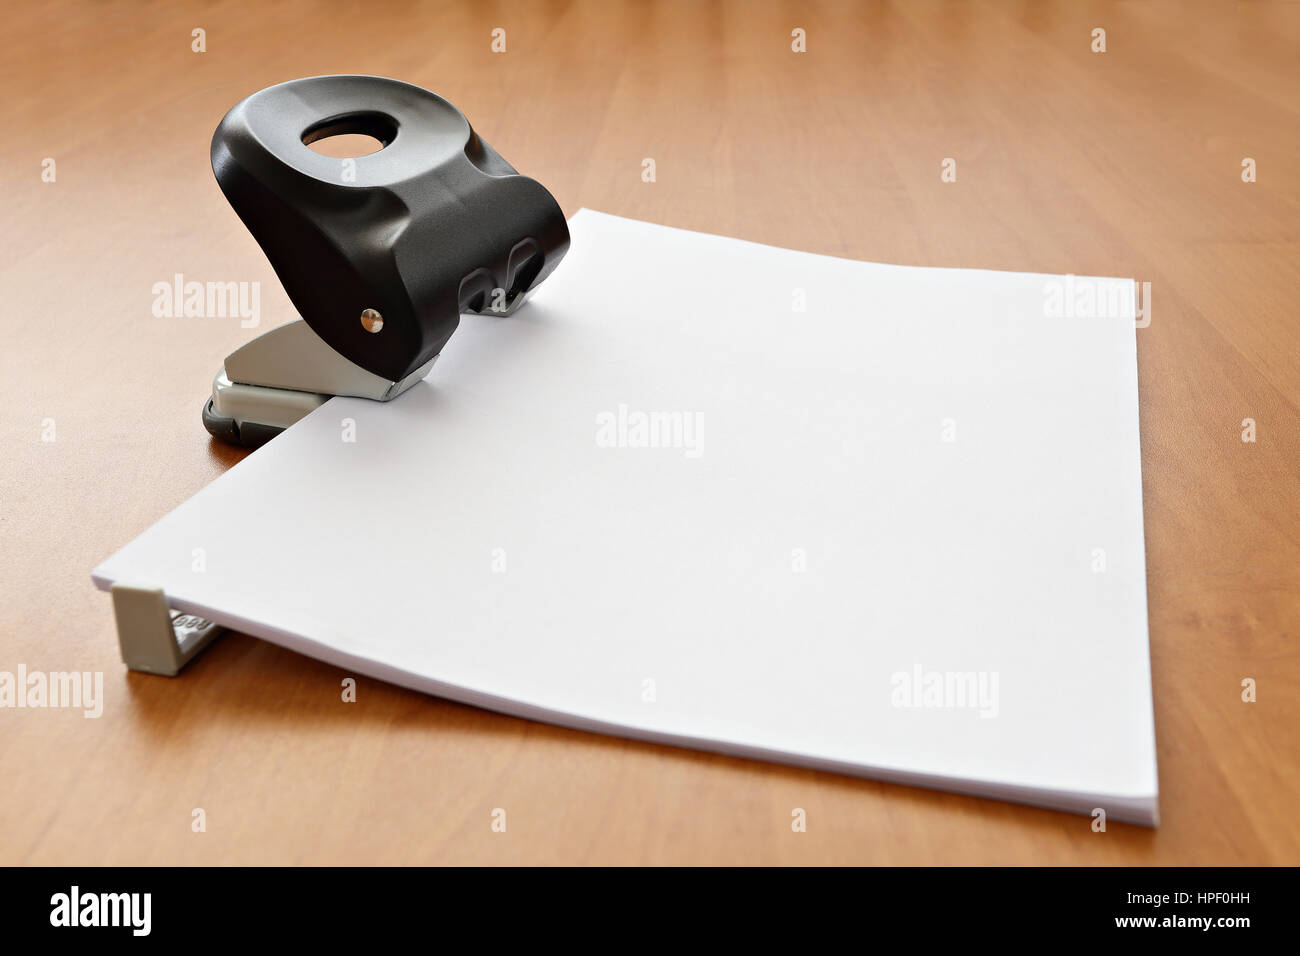 Red office paper hole puncher, isolated on white background Stock Photo -  Alamy